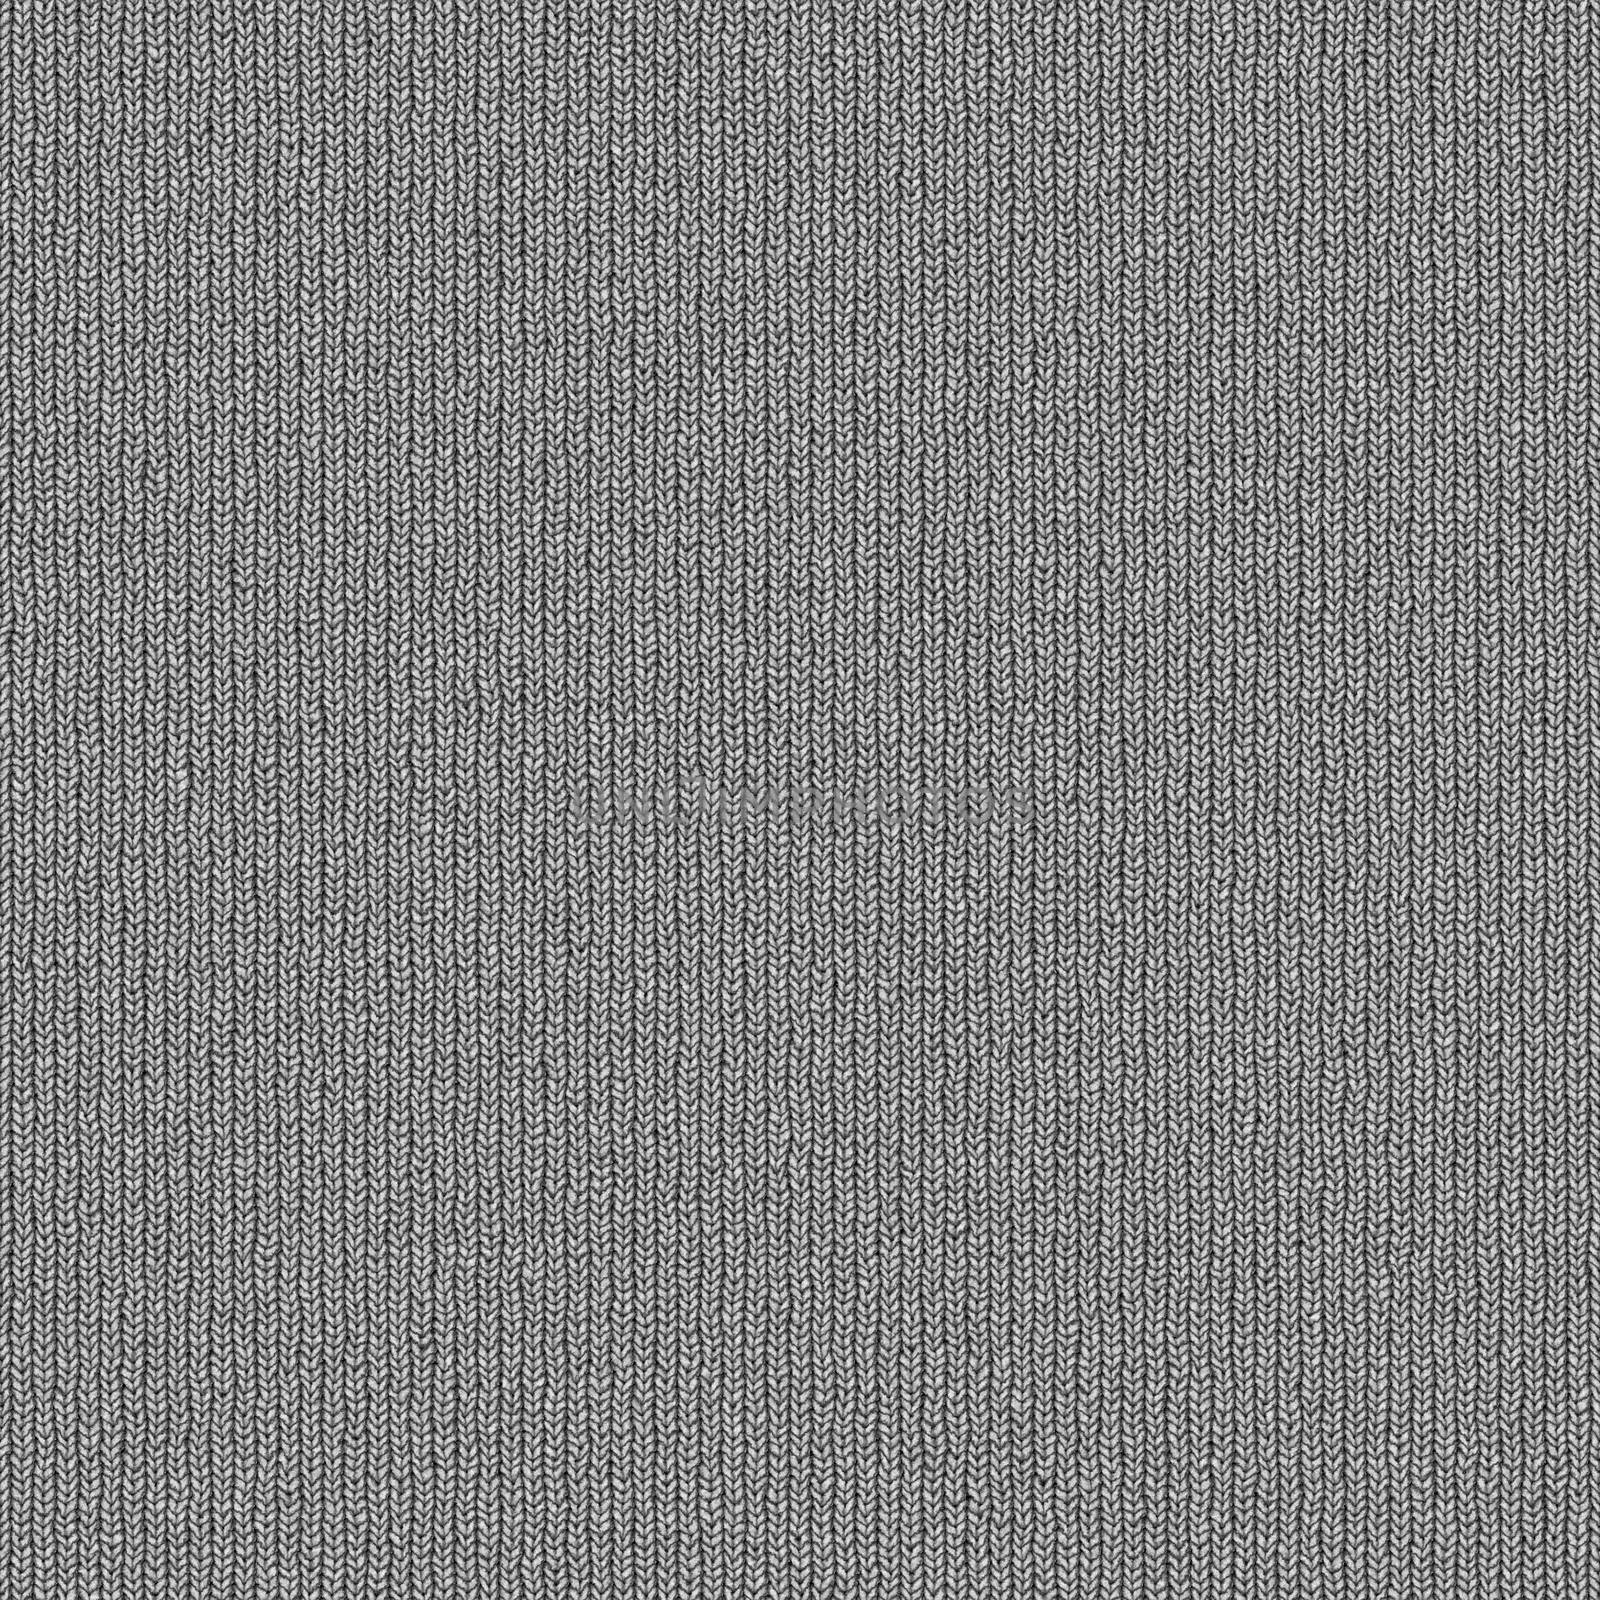 Seamless computer generated close up of knitted fabric texture b by Nanisimova